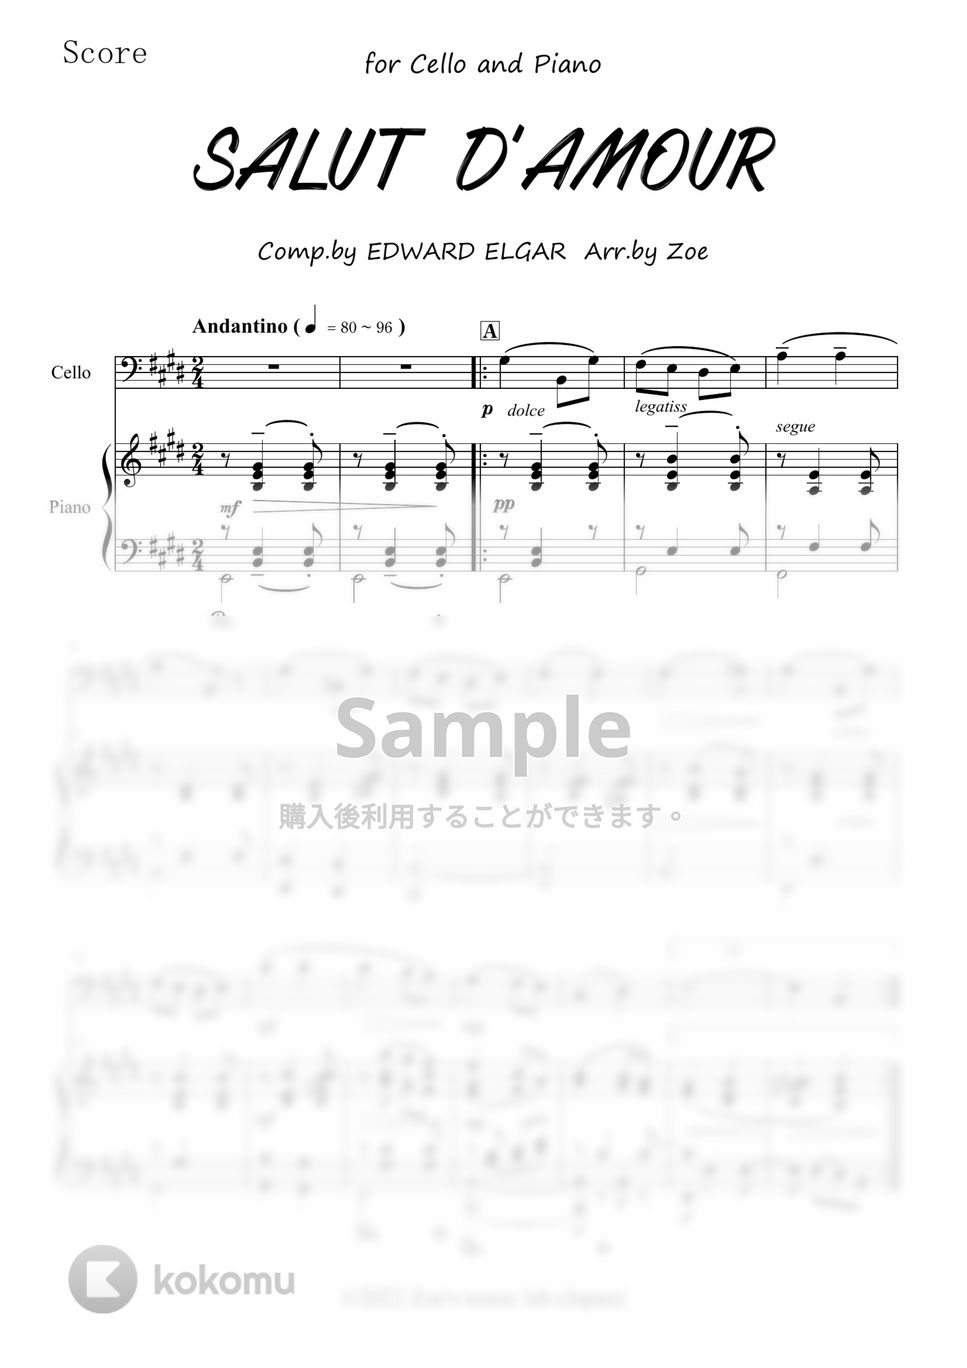 EDWARD ELGAR - 愛の挨拶 / SALUT D'AMOUR for Cello and Piano (原調版) (ピアノ/エルガー/チェロ/) by Zoe